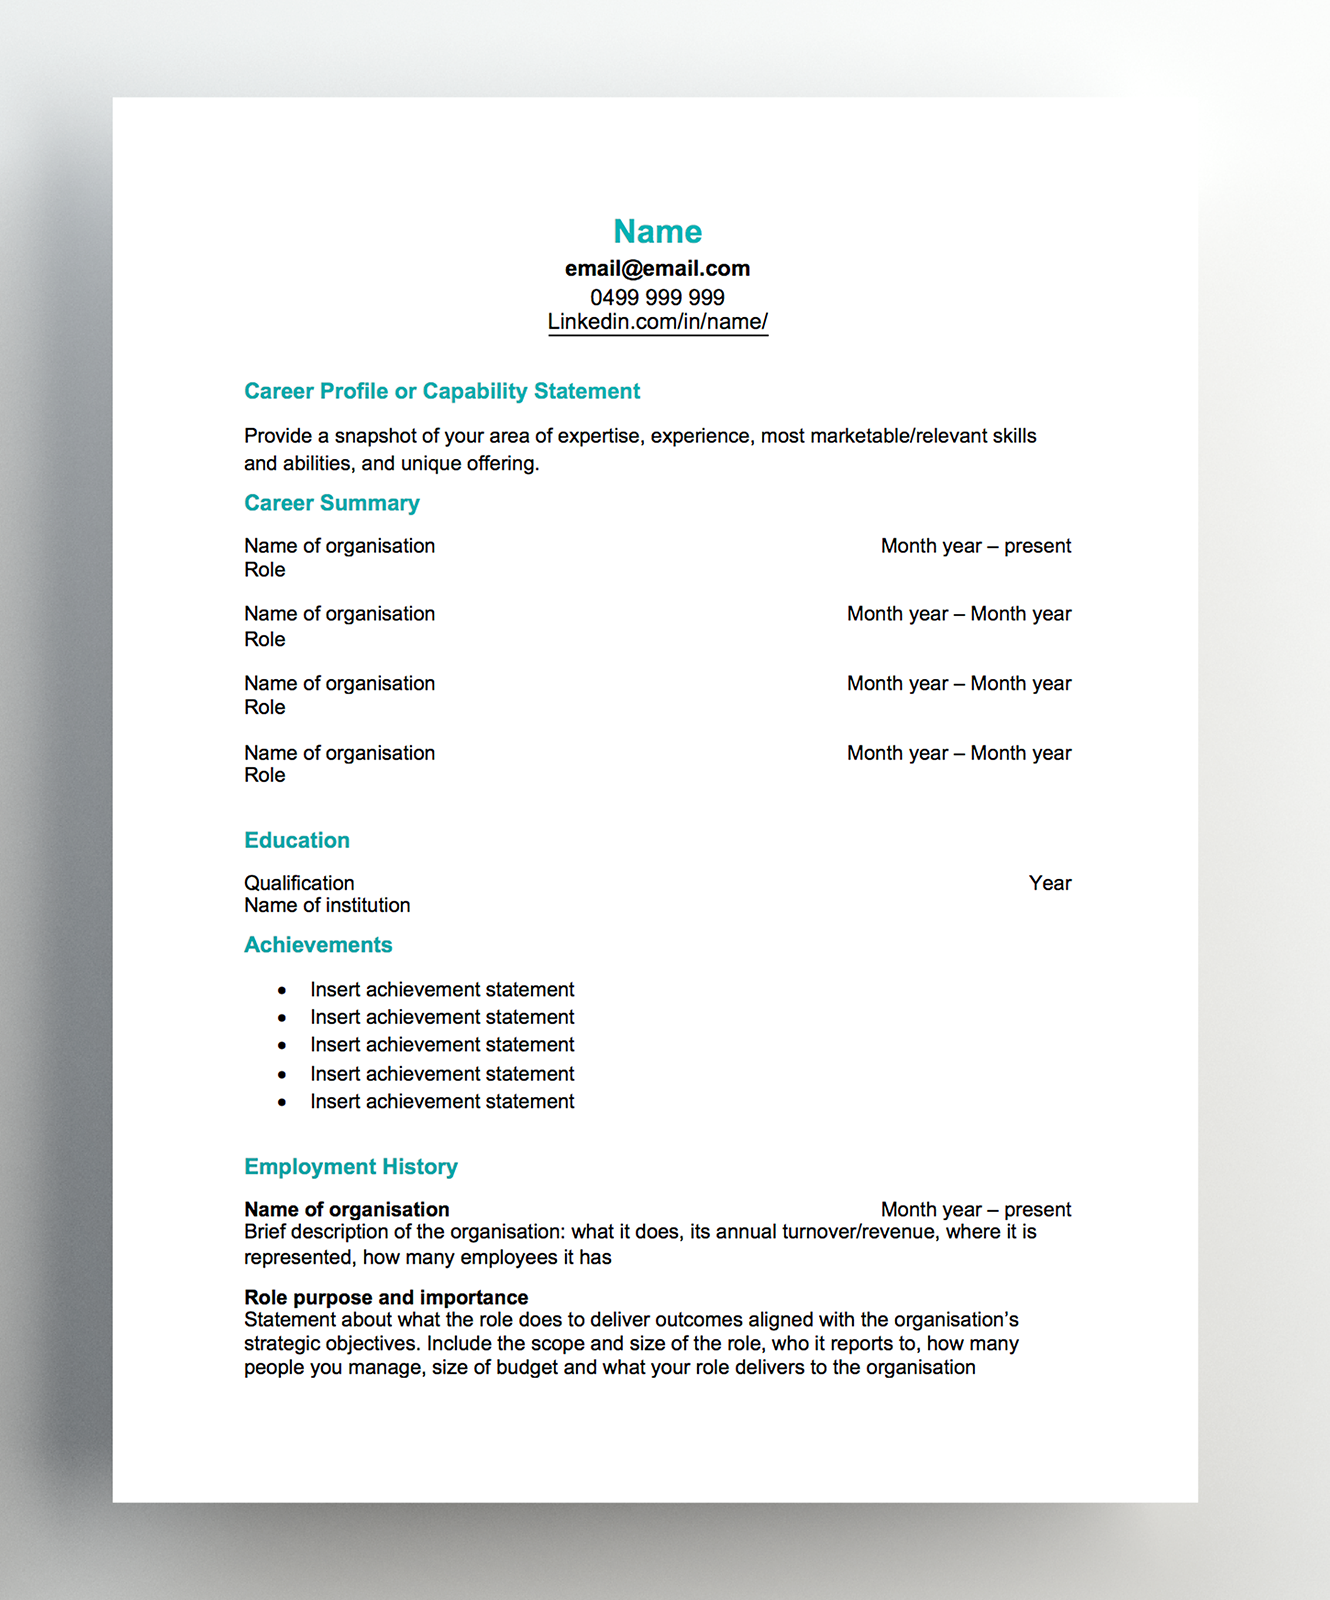 Resume Template Free Reverse Chronological Resume resume template free|wikiresume.com